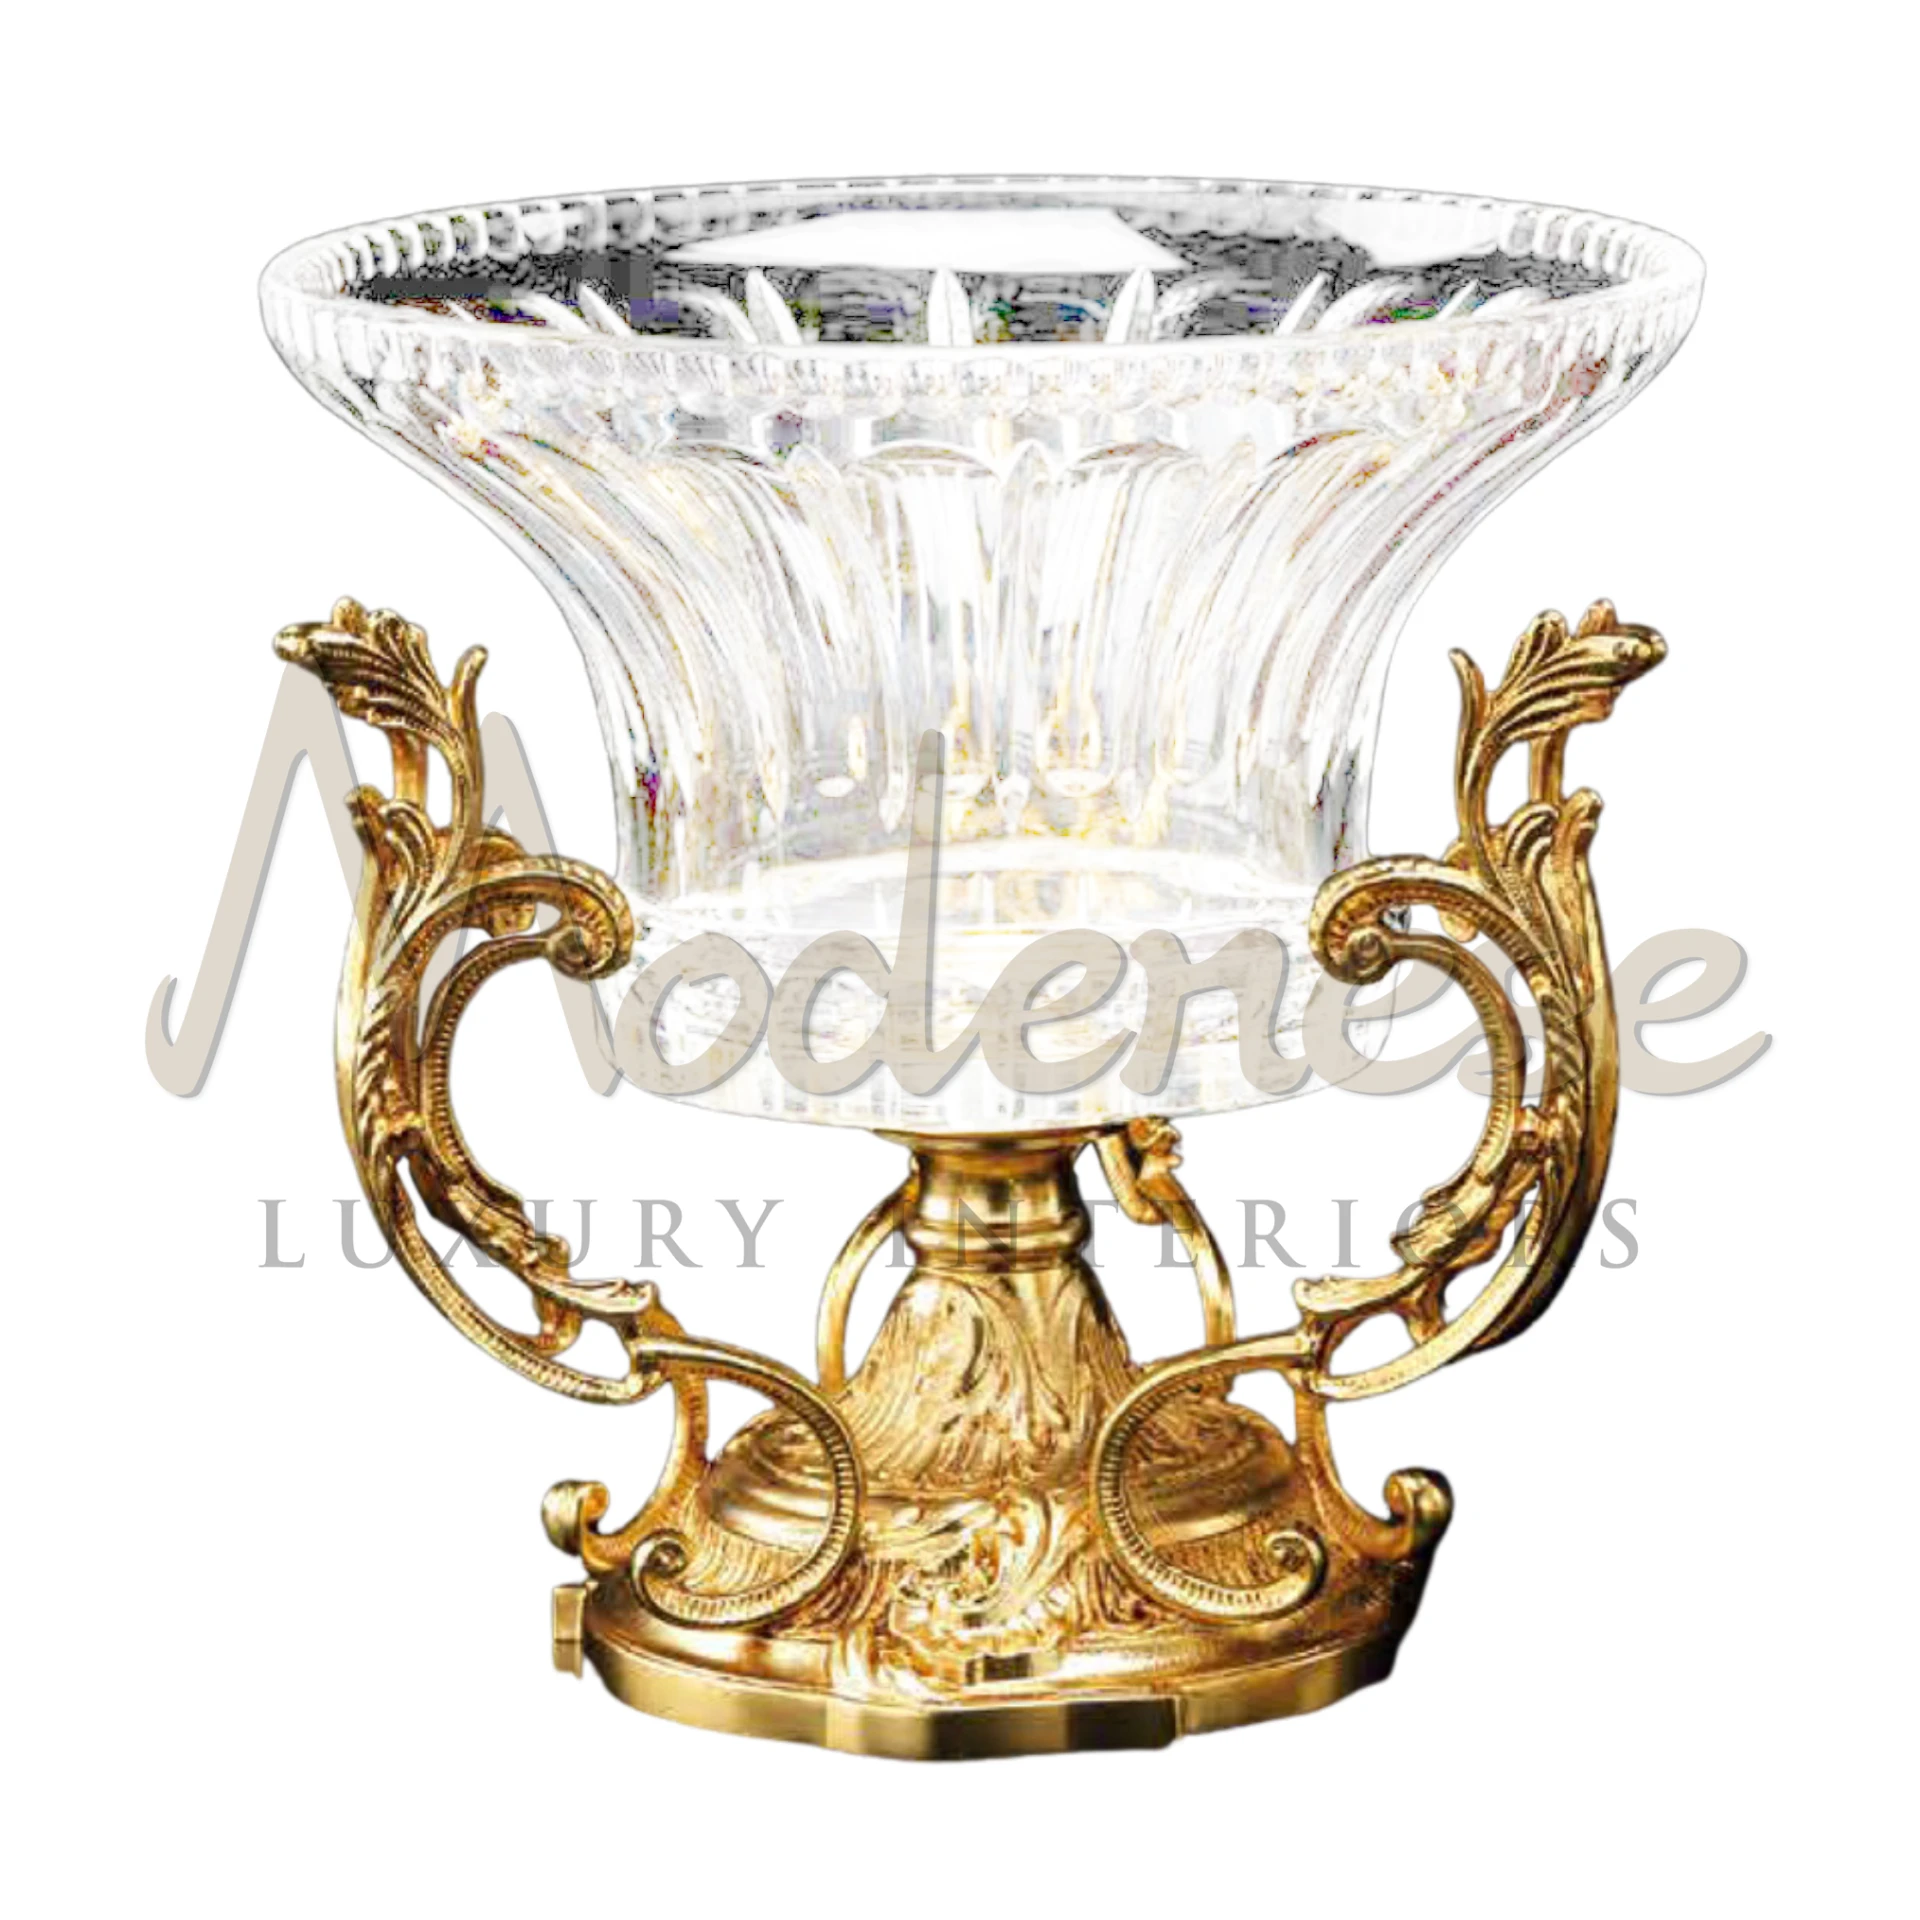 Elegant Design Crystal Vase, a luxury glass vase with intricate detailing, ideal for sophisticated interior design in baroque or classic style.